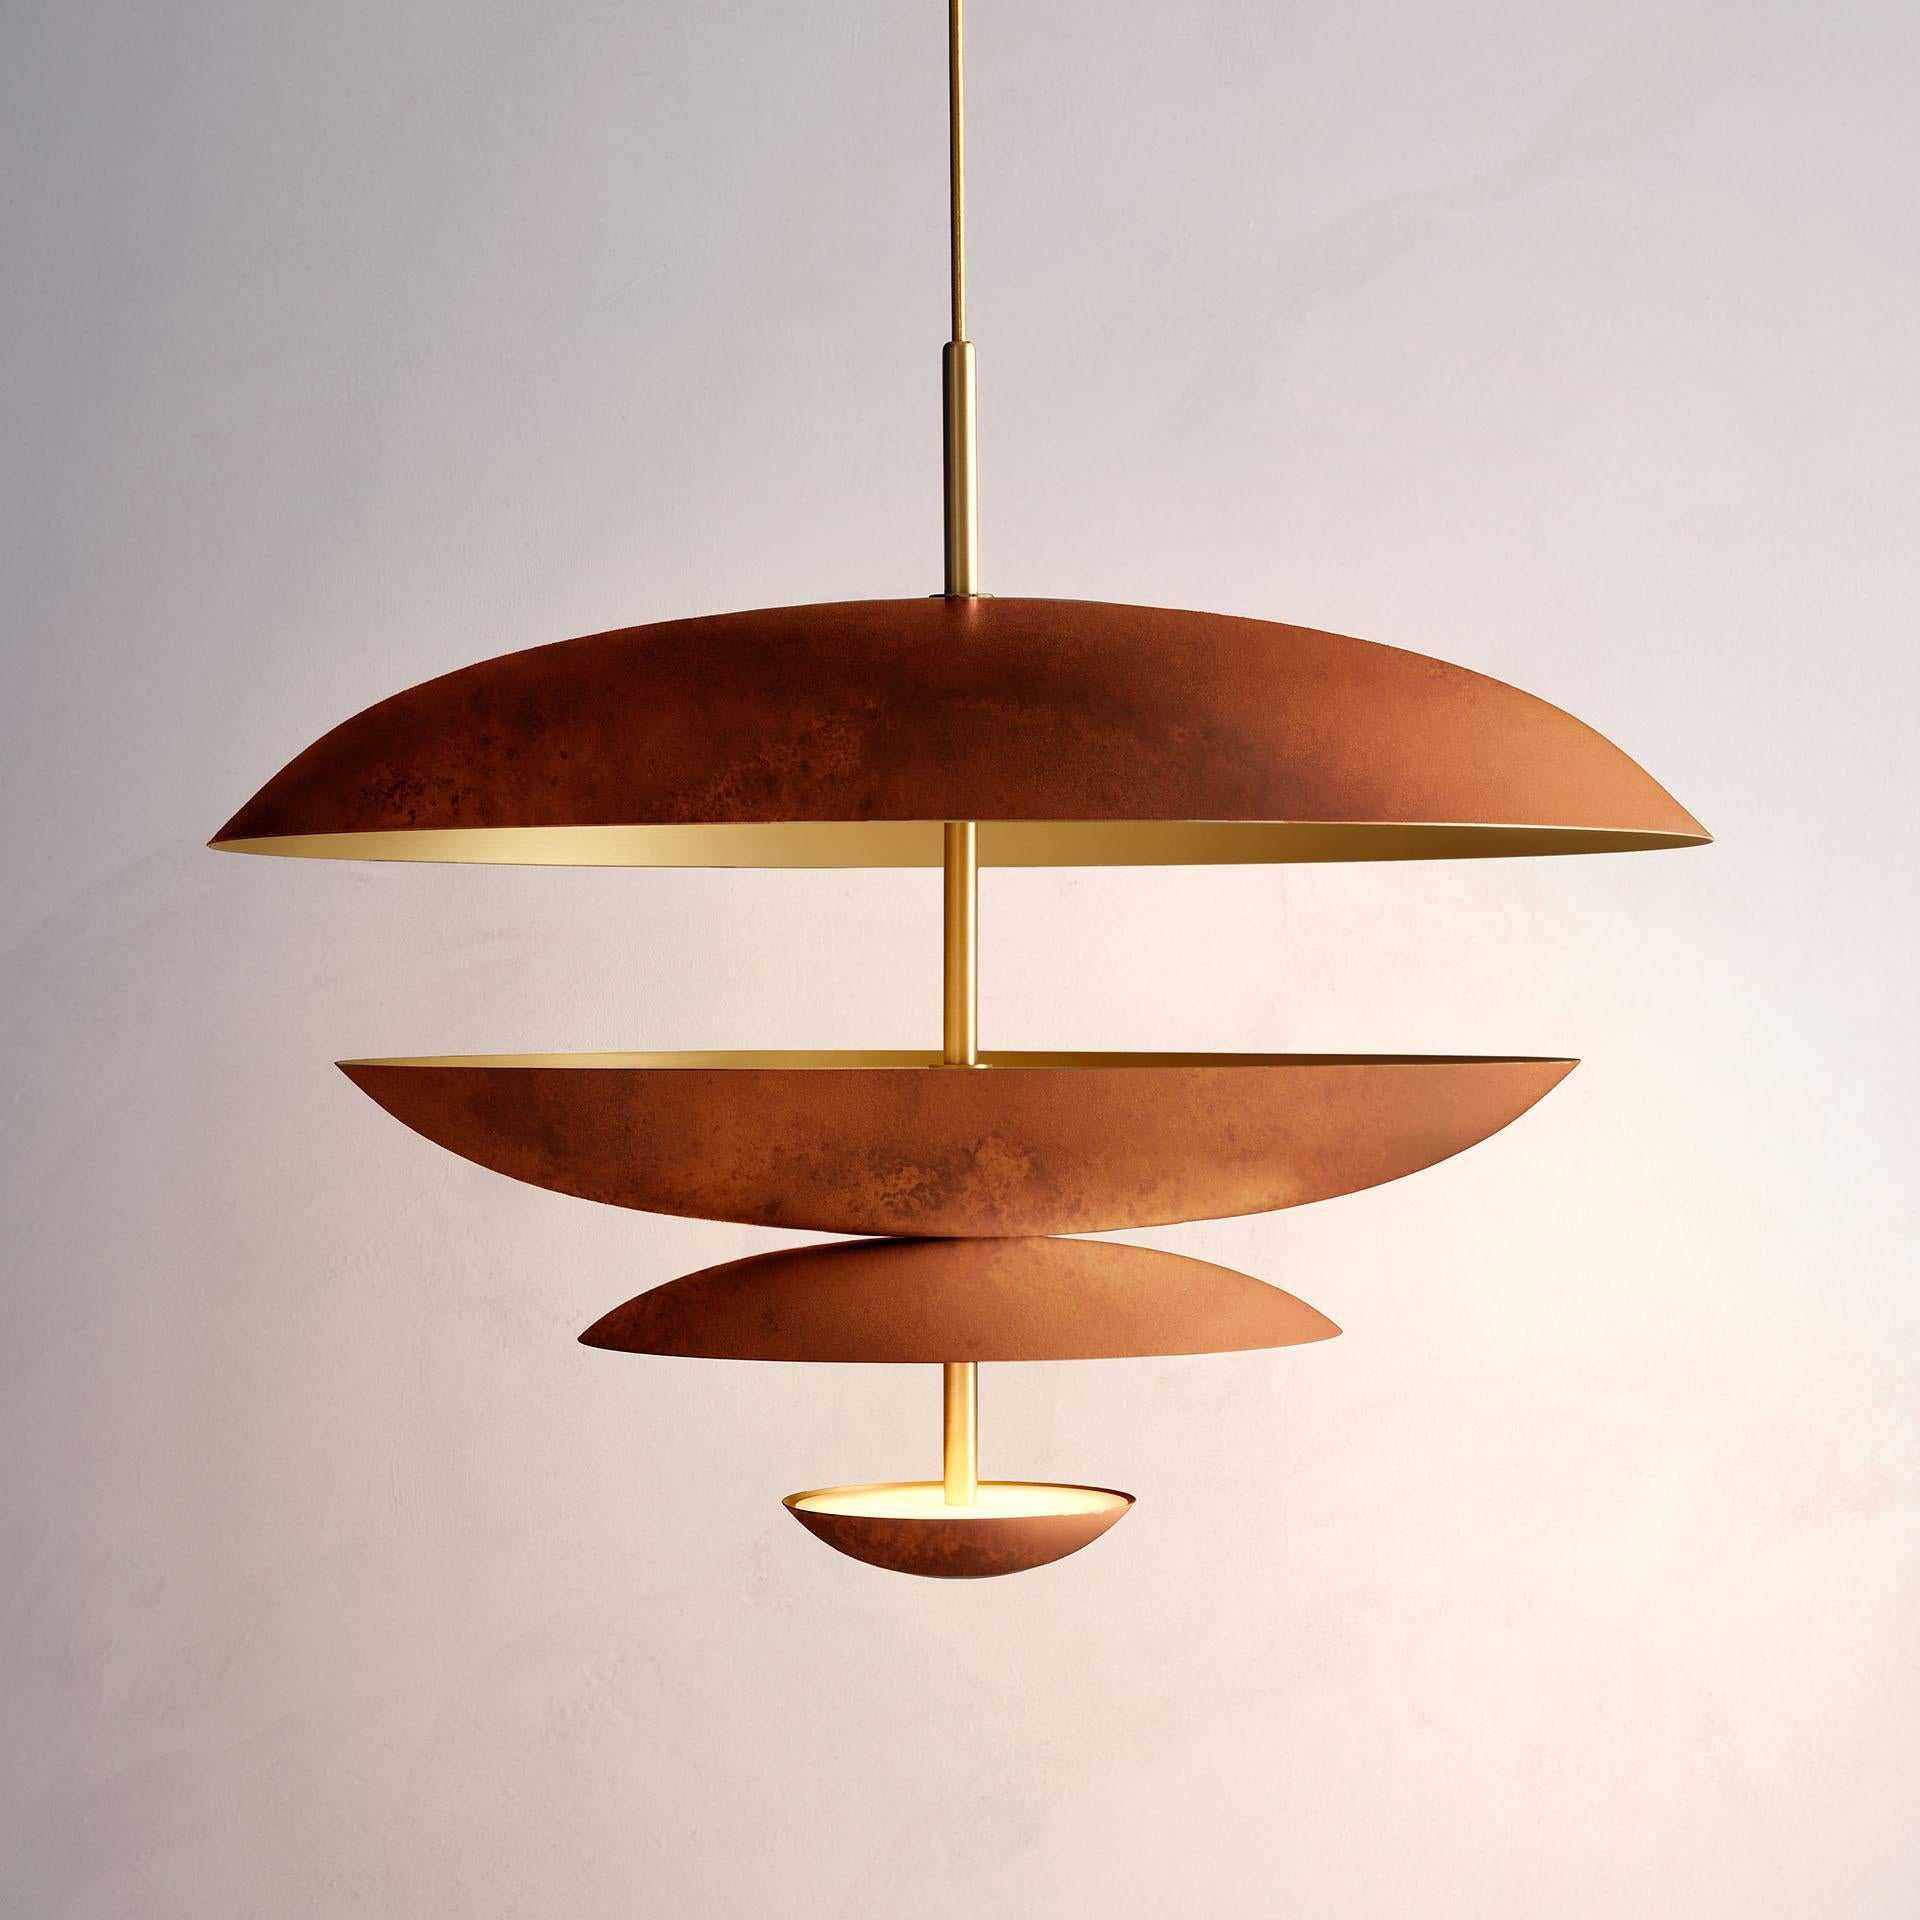 Composed by four finely hand-spun brass plates, this chandelier is finished in a rust patina on one side and satin brushed brass on the other to reveal the bright texture of brass. 

This light fixture is suitable for both contemporary and vintage